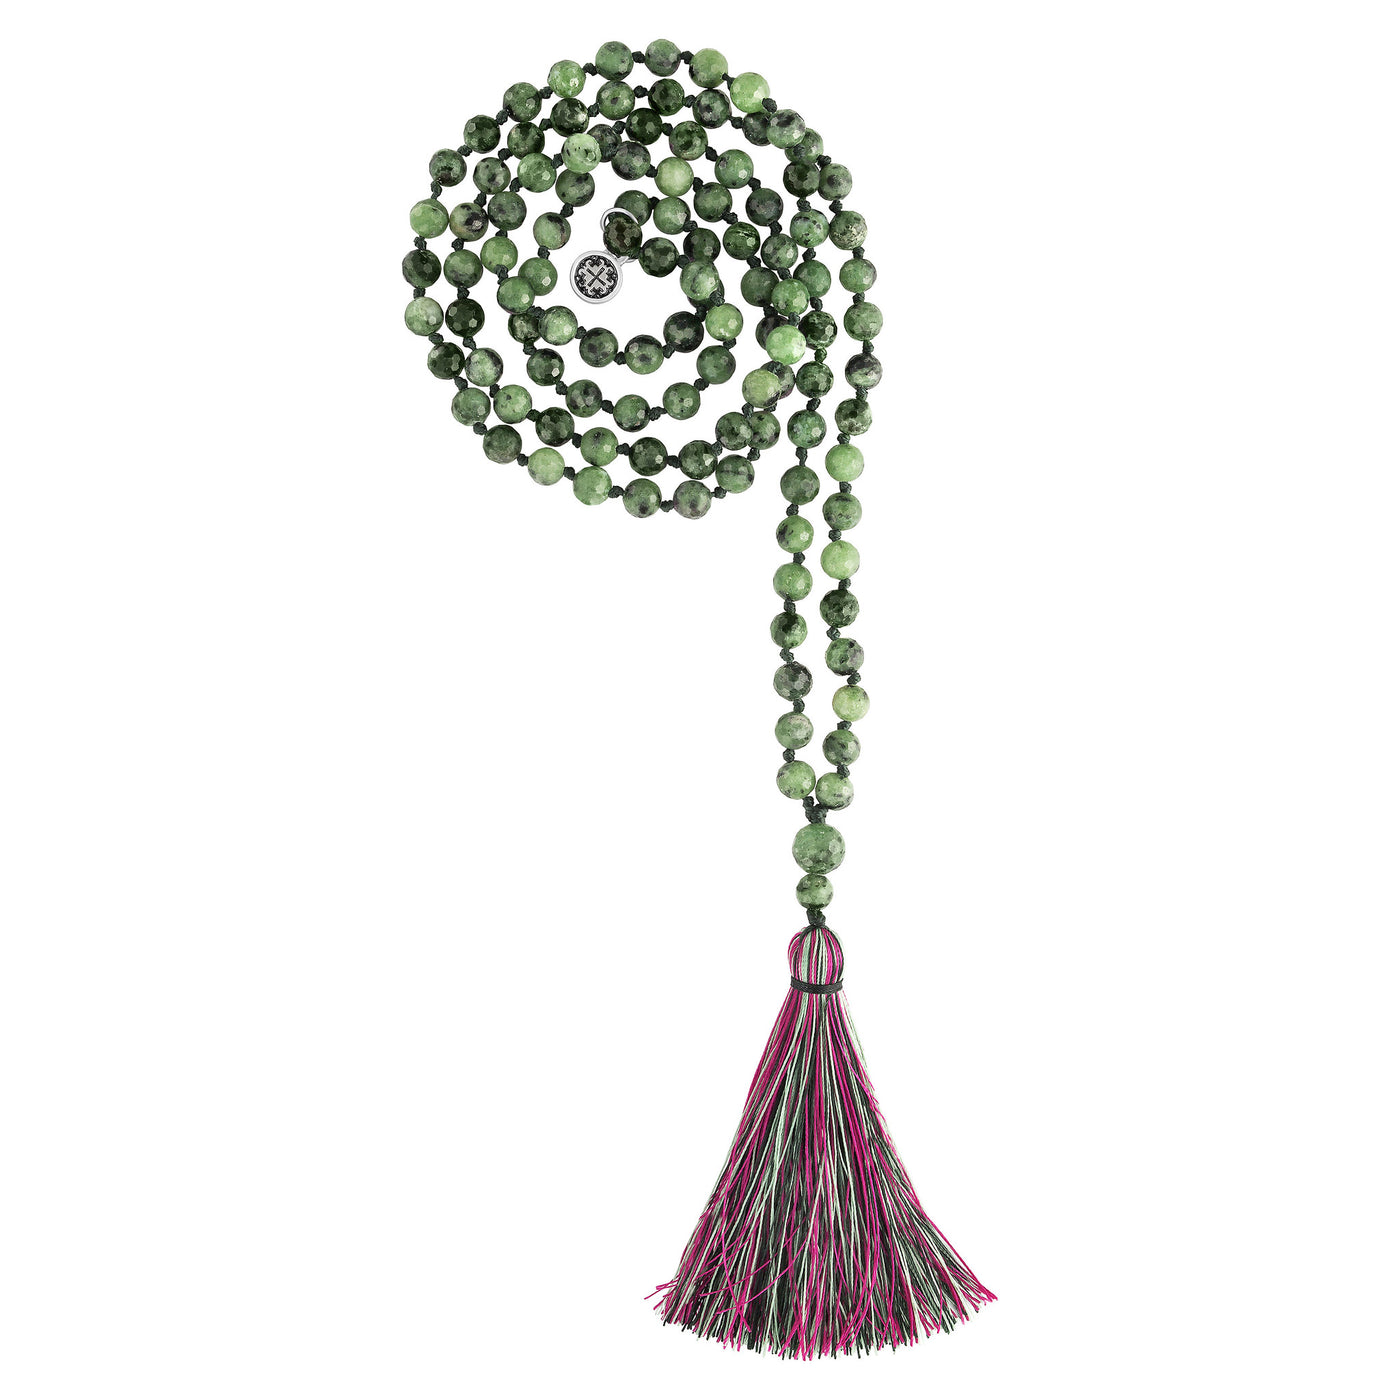 INDIVIDUALITY: Ruby Zoisite Faceted 108 Bead Hand-Knotted Mala